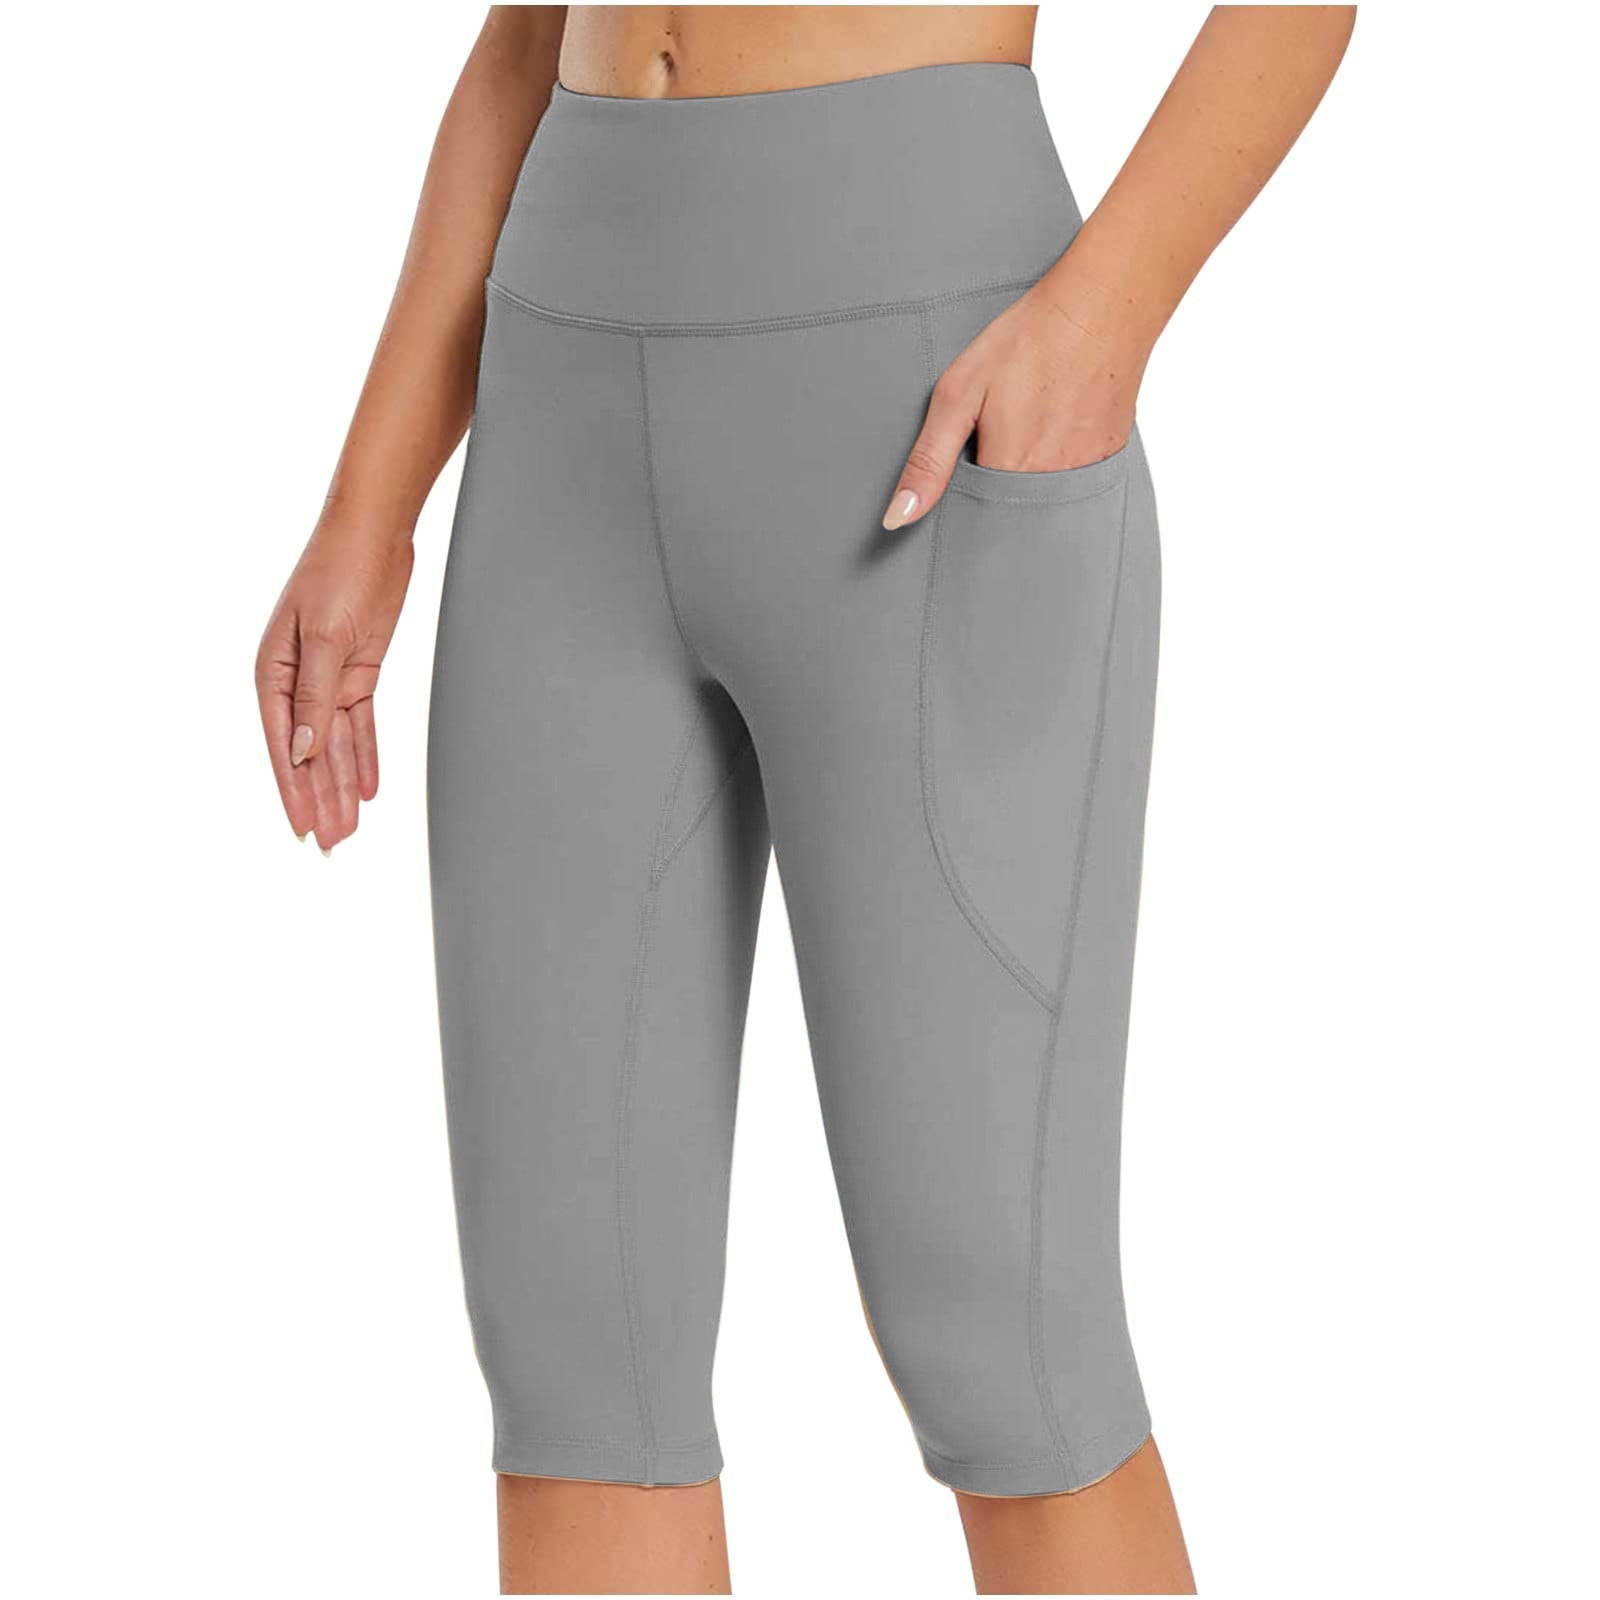 YWDJ Tights for Women Capris With Pockets High Waist Casual